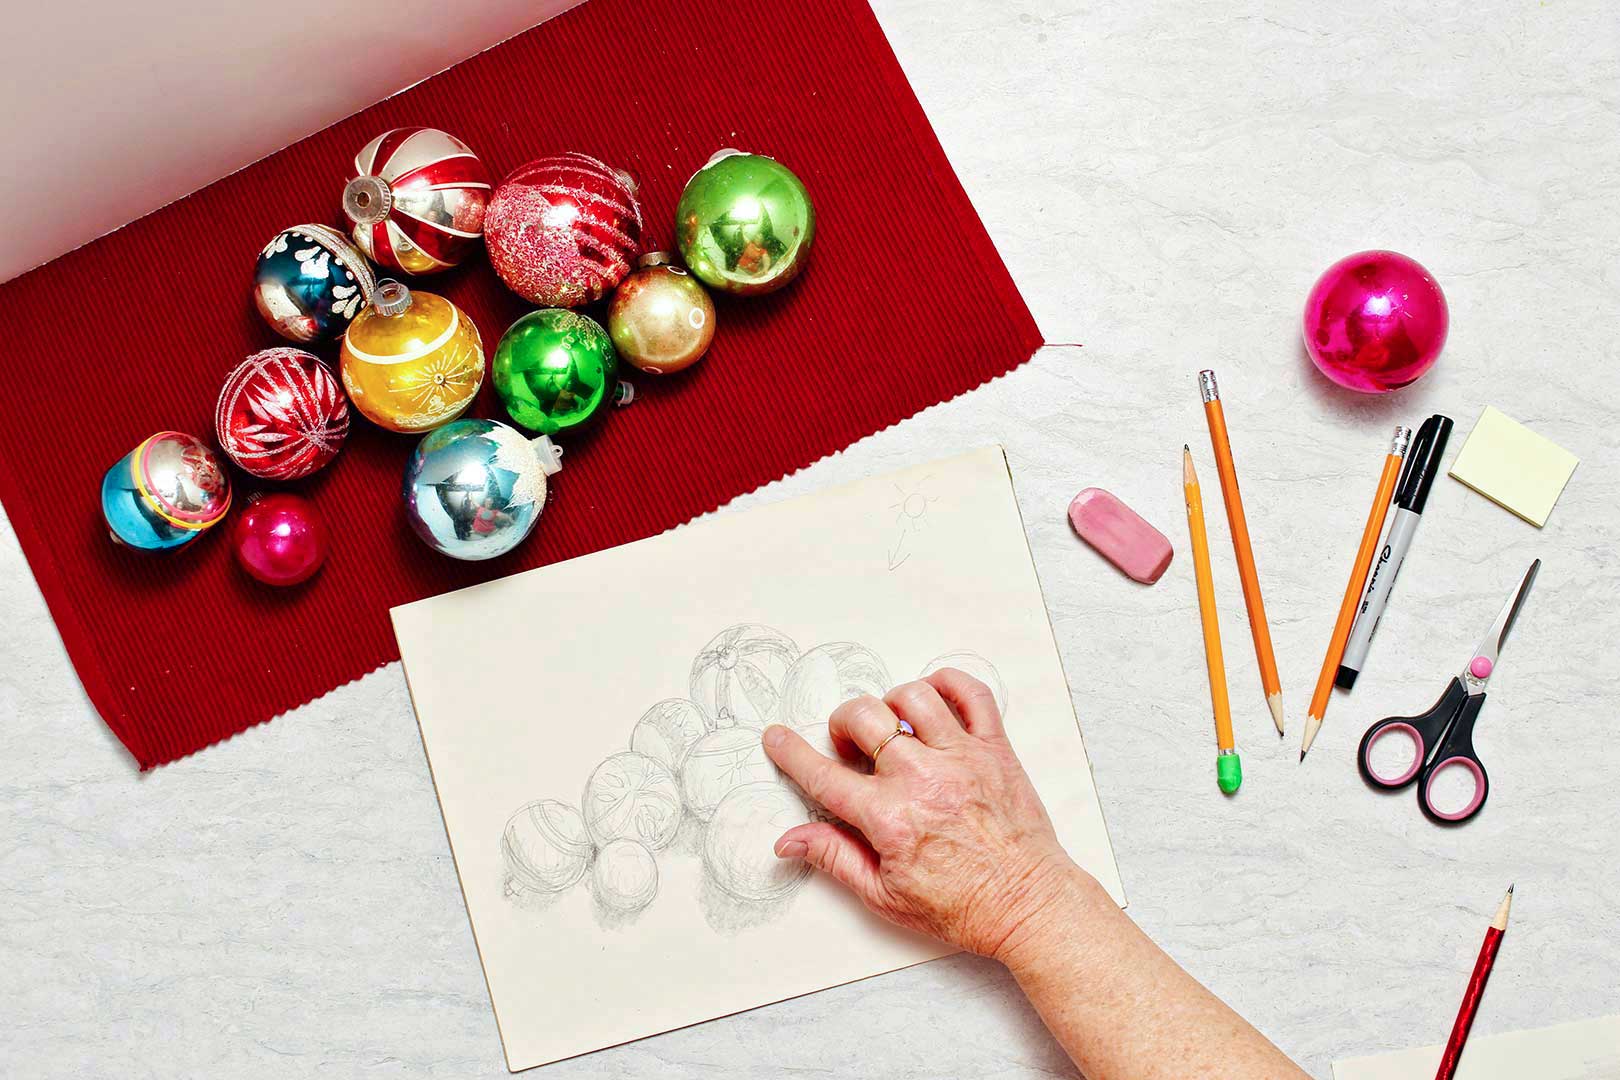 Christmas ornaments lay on a red placemat and person blends some of their drawing with their finger.